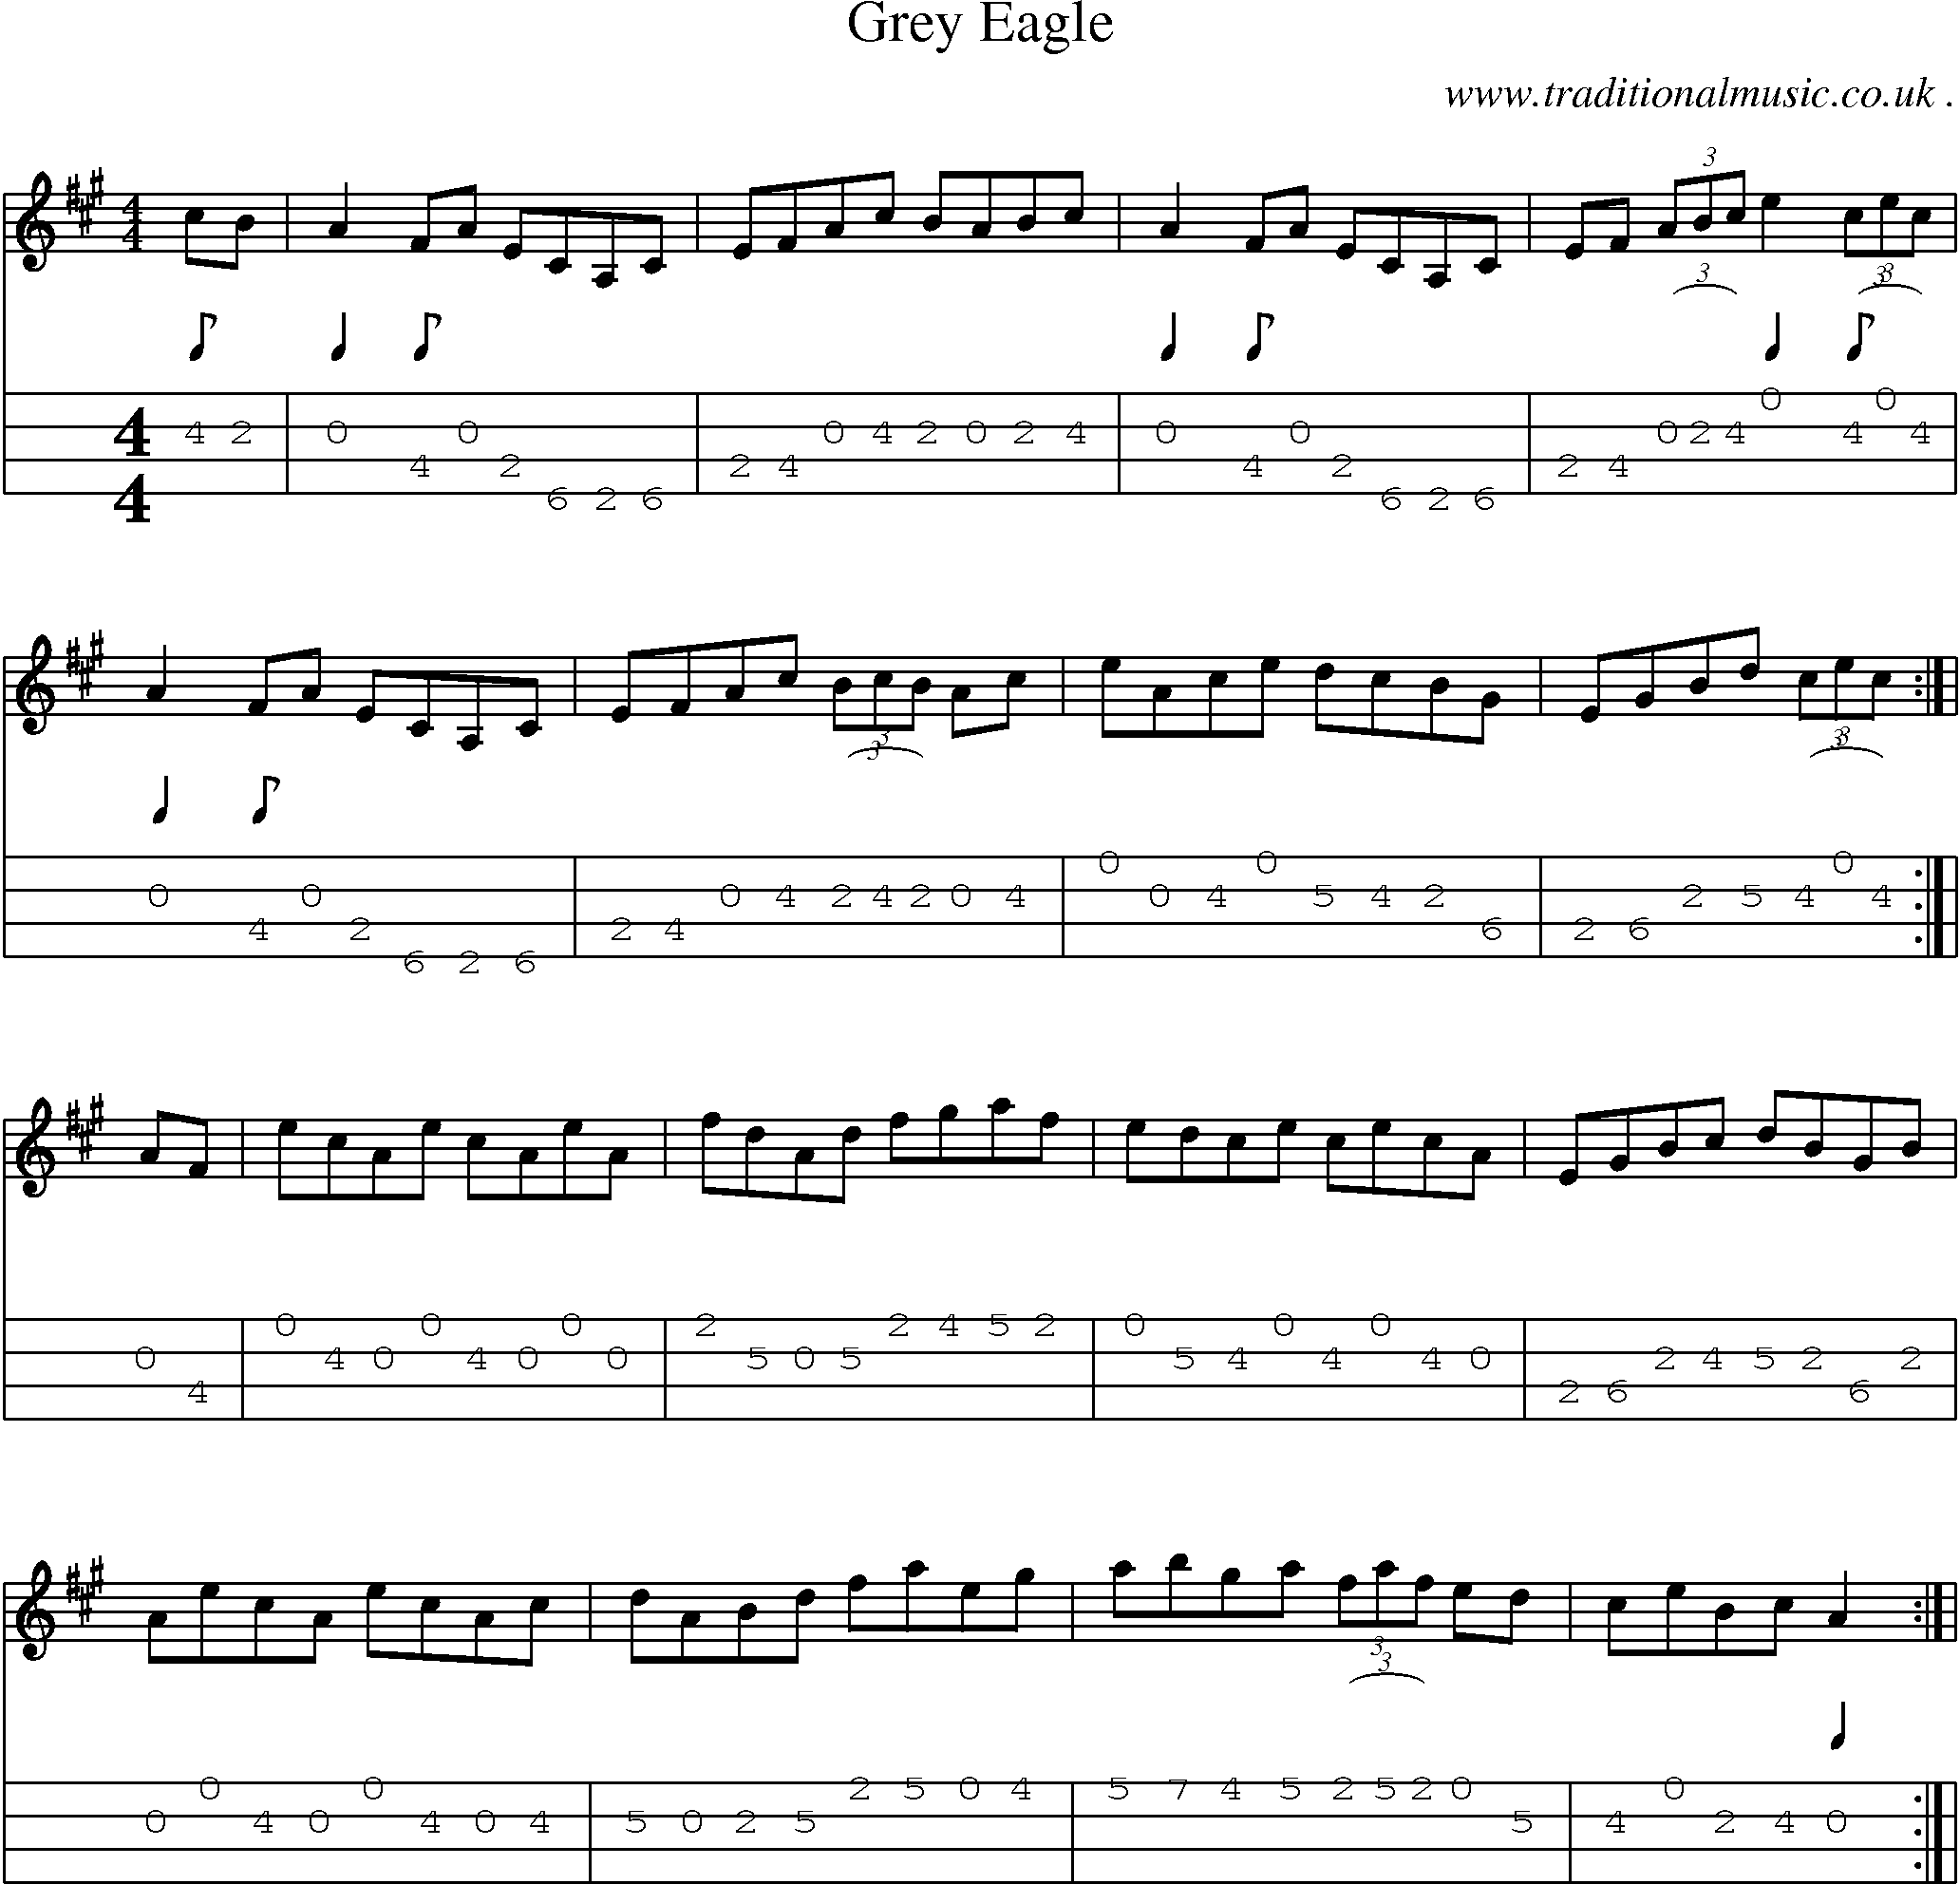 Music Score and Guitar Tabs for Grey Eagle